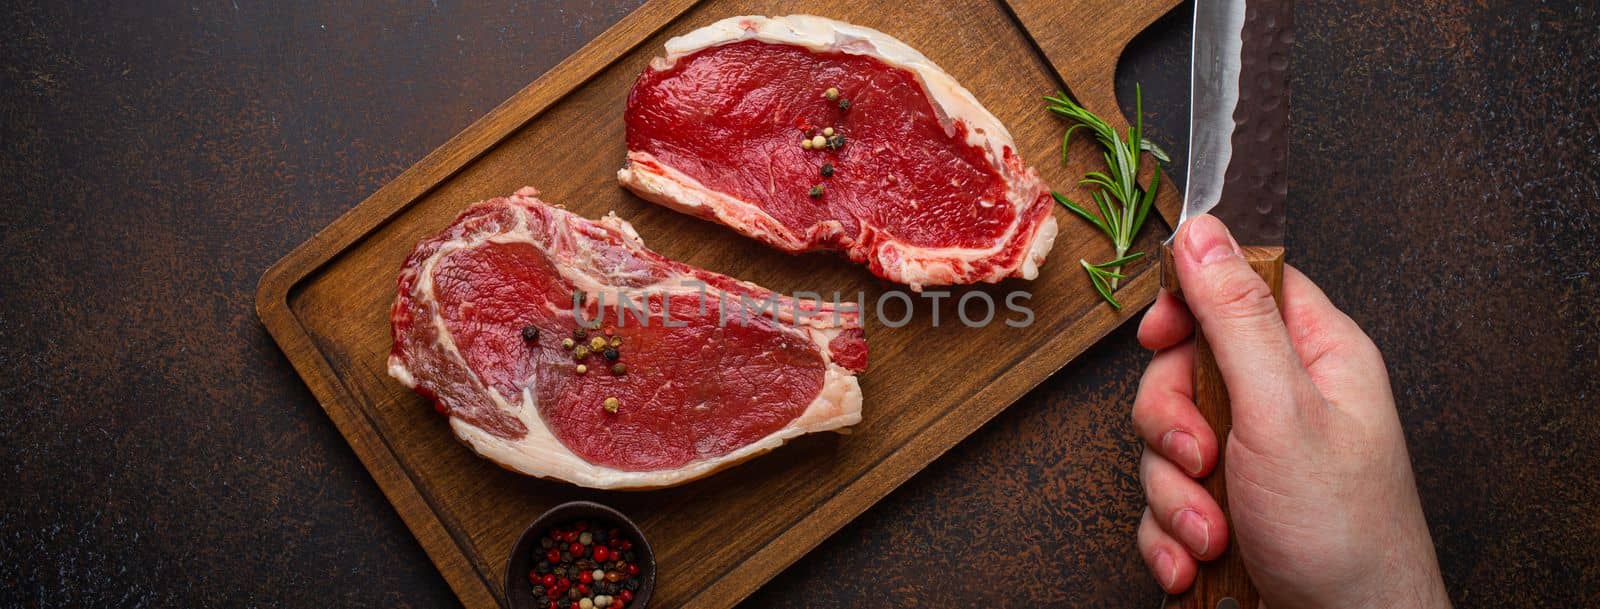 Male's hand holding knife over two raw uncooked meat beef rib eye marbled steaks on wooden cutting board and seasonings on dark rustic background from above, preparing dinner with meat